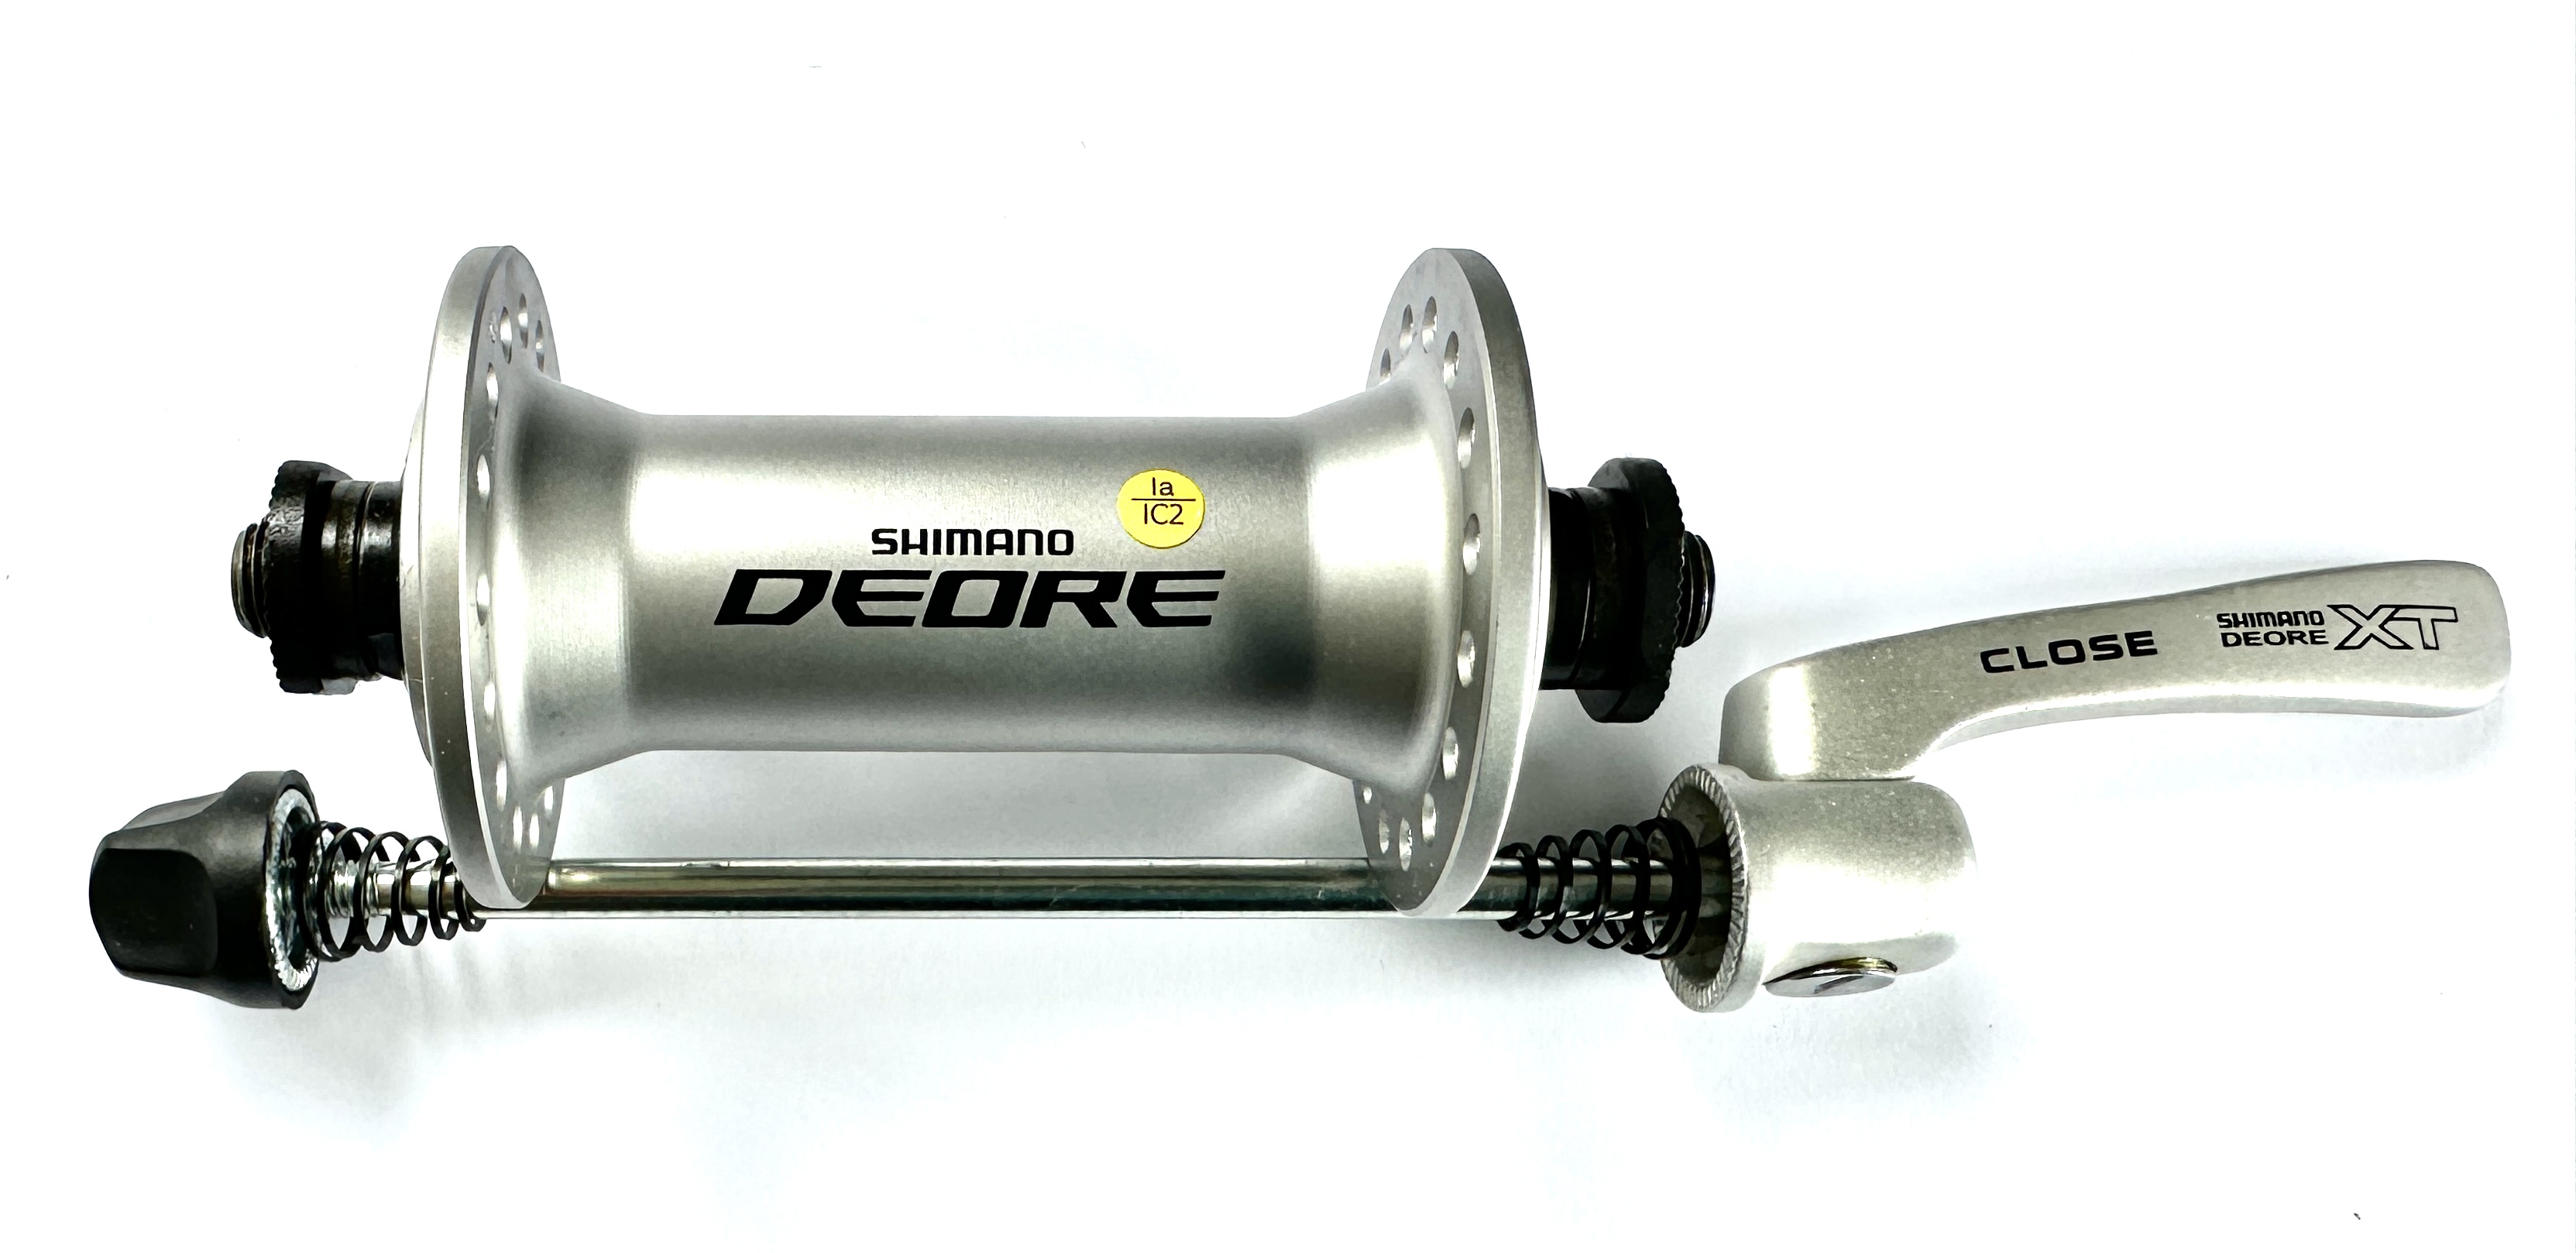 Shimano Deore HB-M590 front hub 32-hole, silver